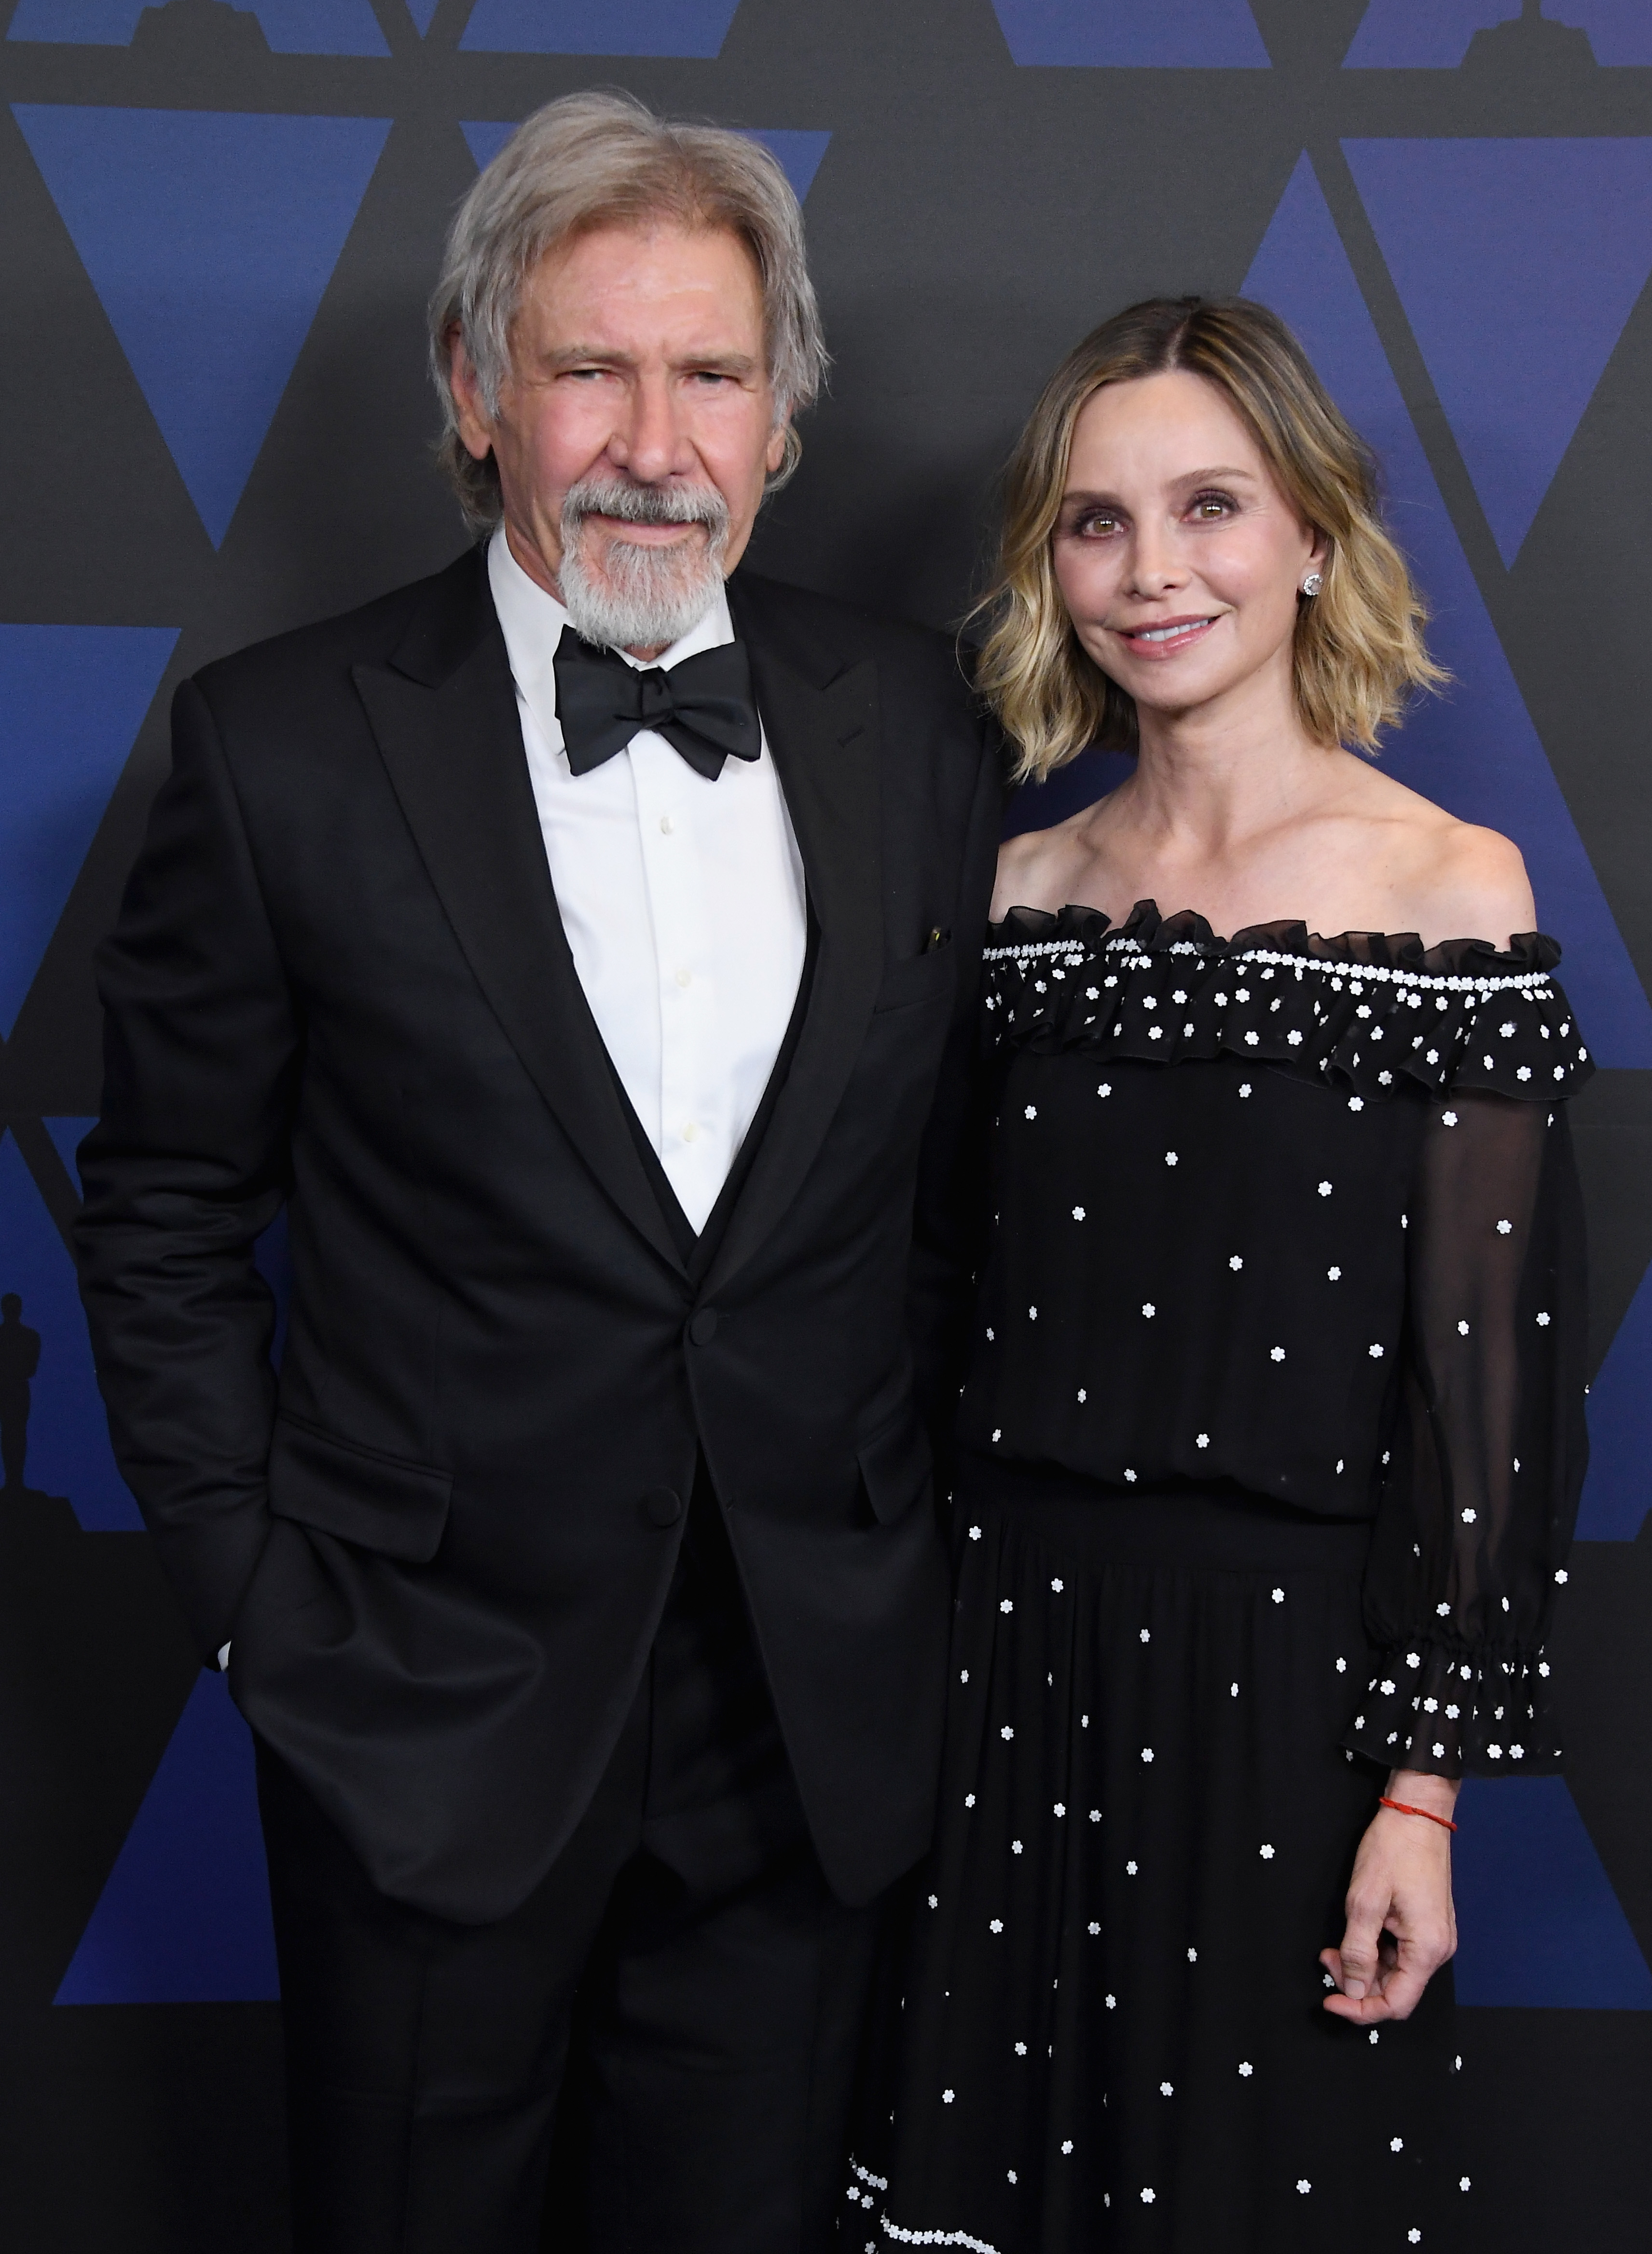 Two celebrities in formal wear, man in a tuxedo and woman in a polka-dot dress with sheer details